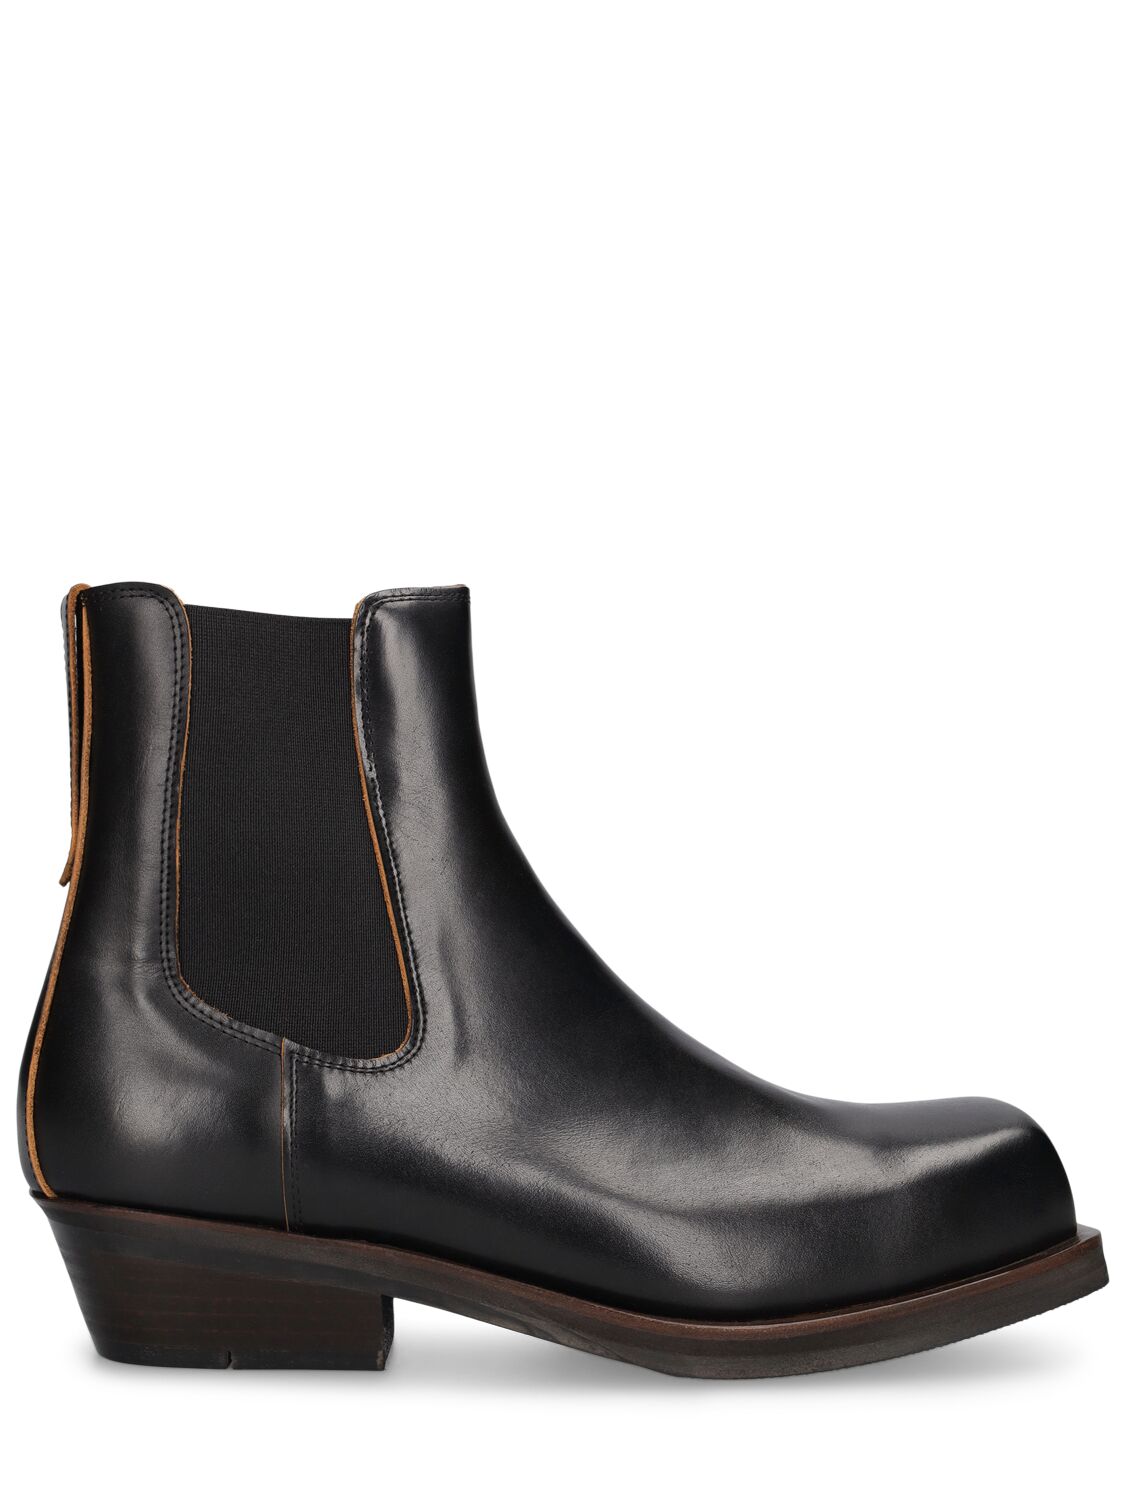 Image of Western Chelsea Boots